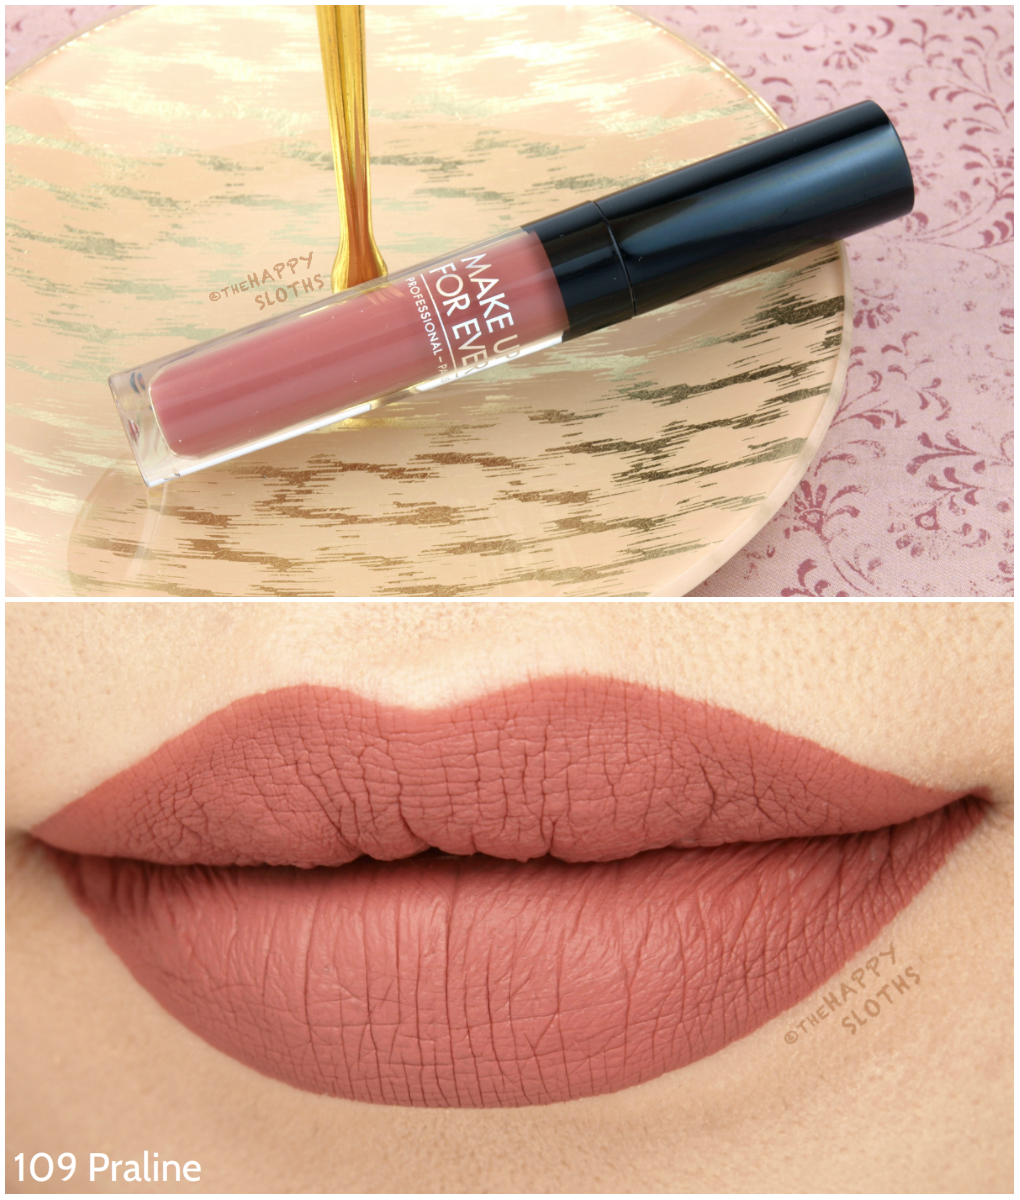 Make Up For Ever Artist Liquid Matte Lipstick in 109 Praline: Review and Swatches